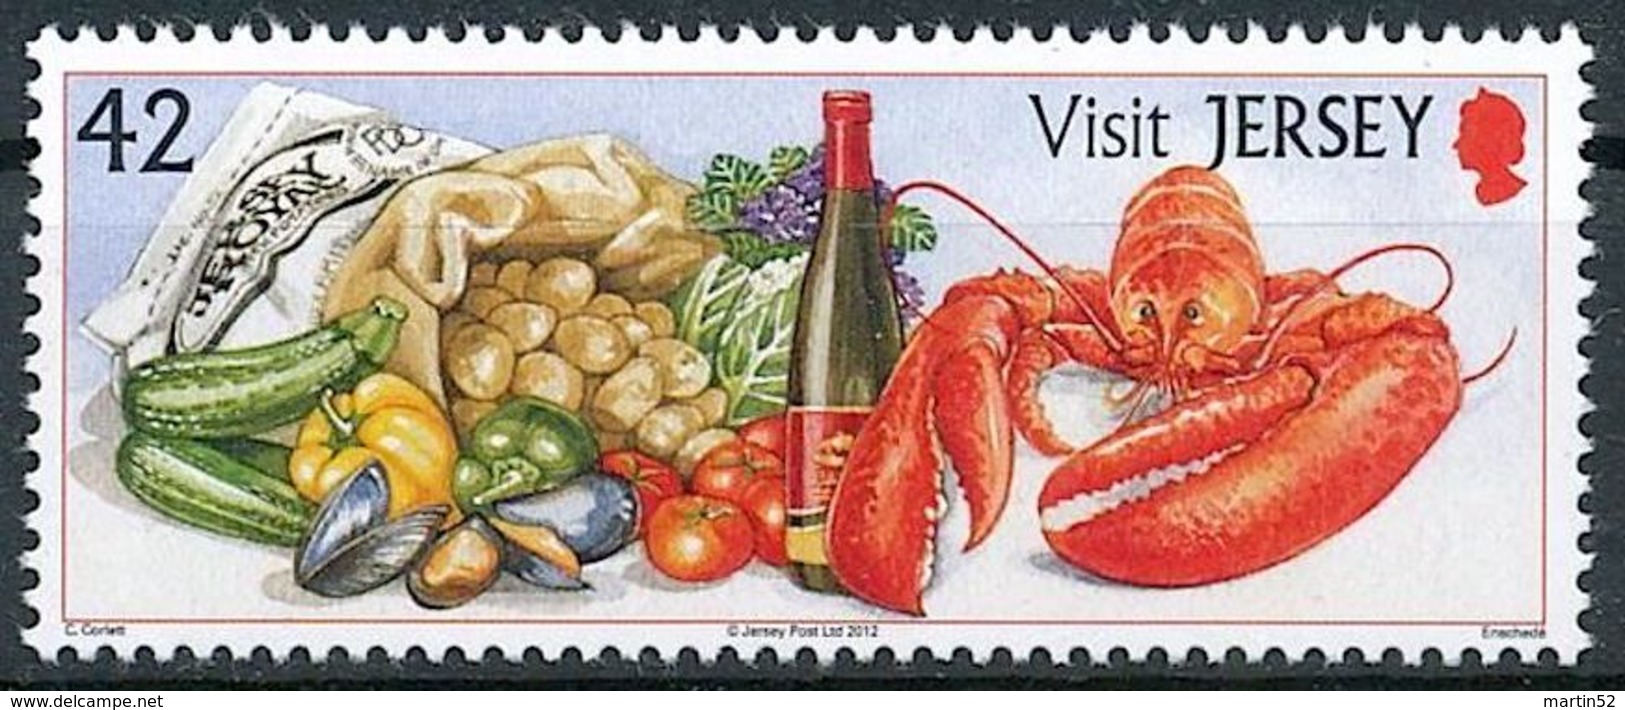 Jersey 2012: "Seafood, Vegetables & Wine" Michel-No. 1614 ** MNH - START BELOW POSTAL FACE VALUE (£ 0.42) - Wines & Alcohols